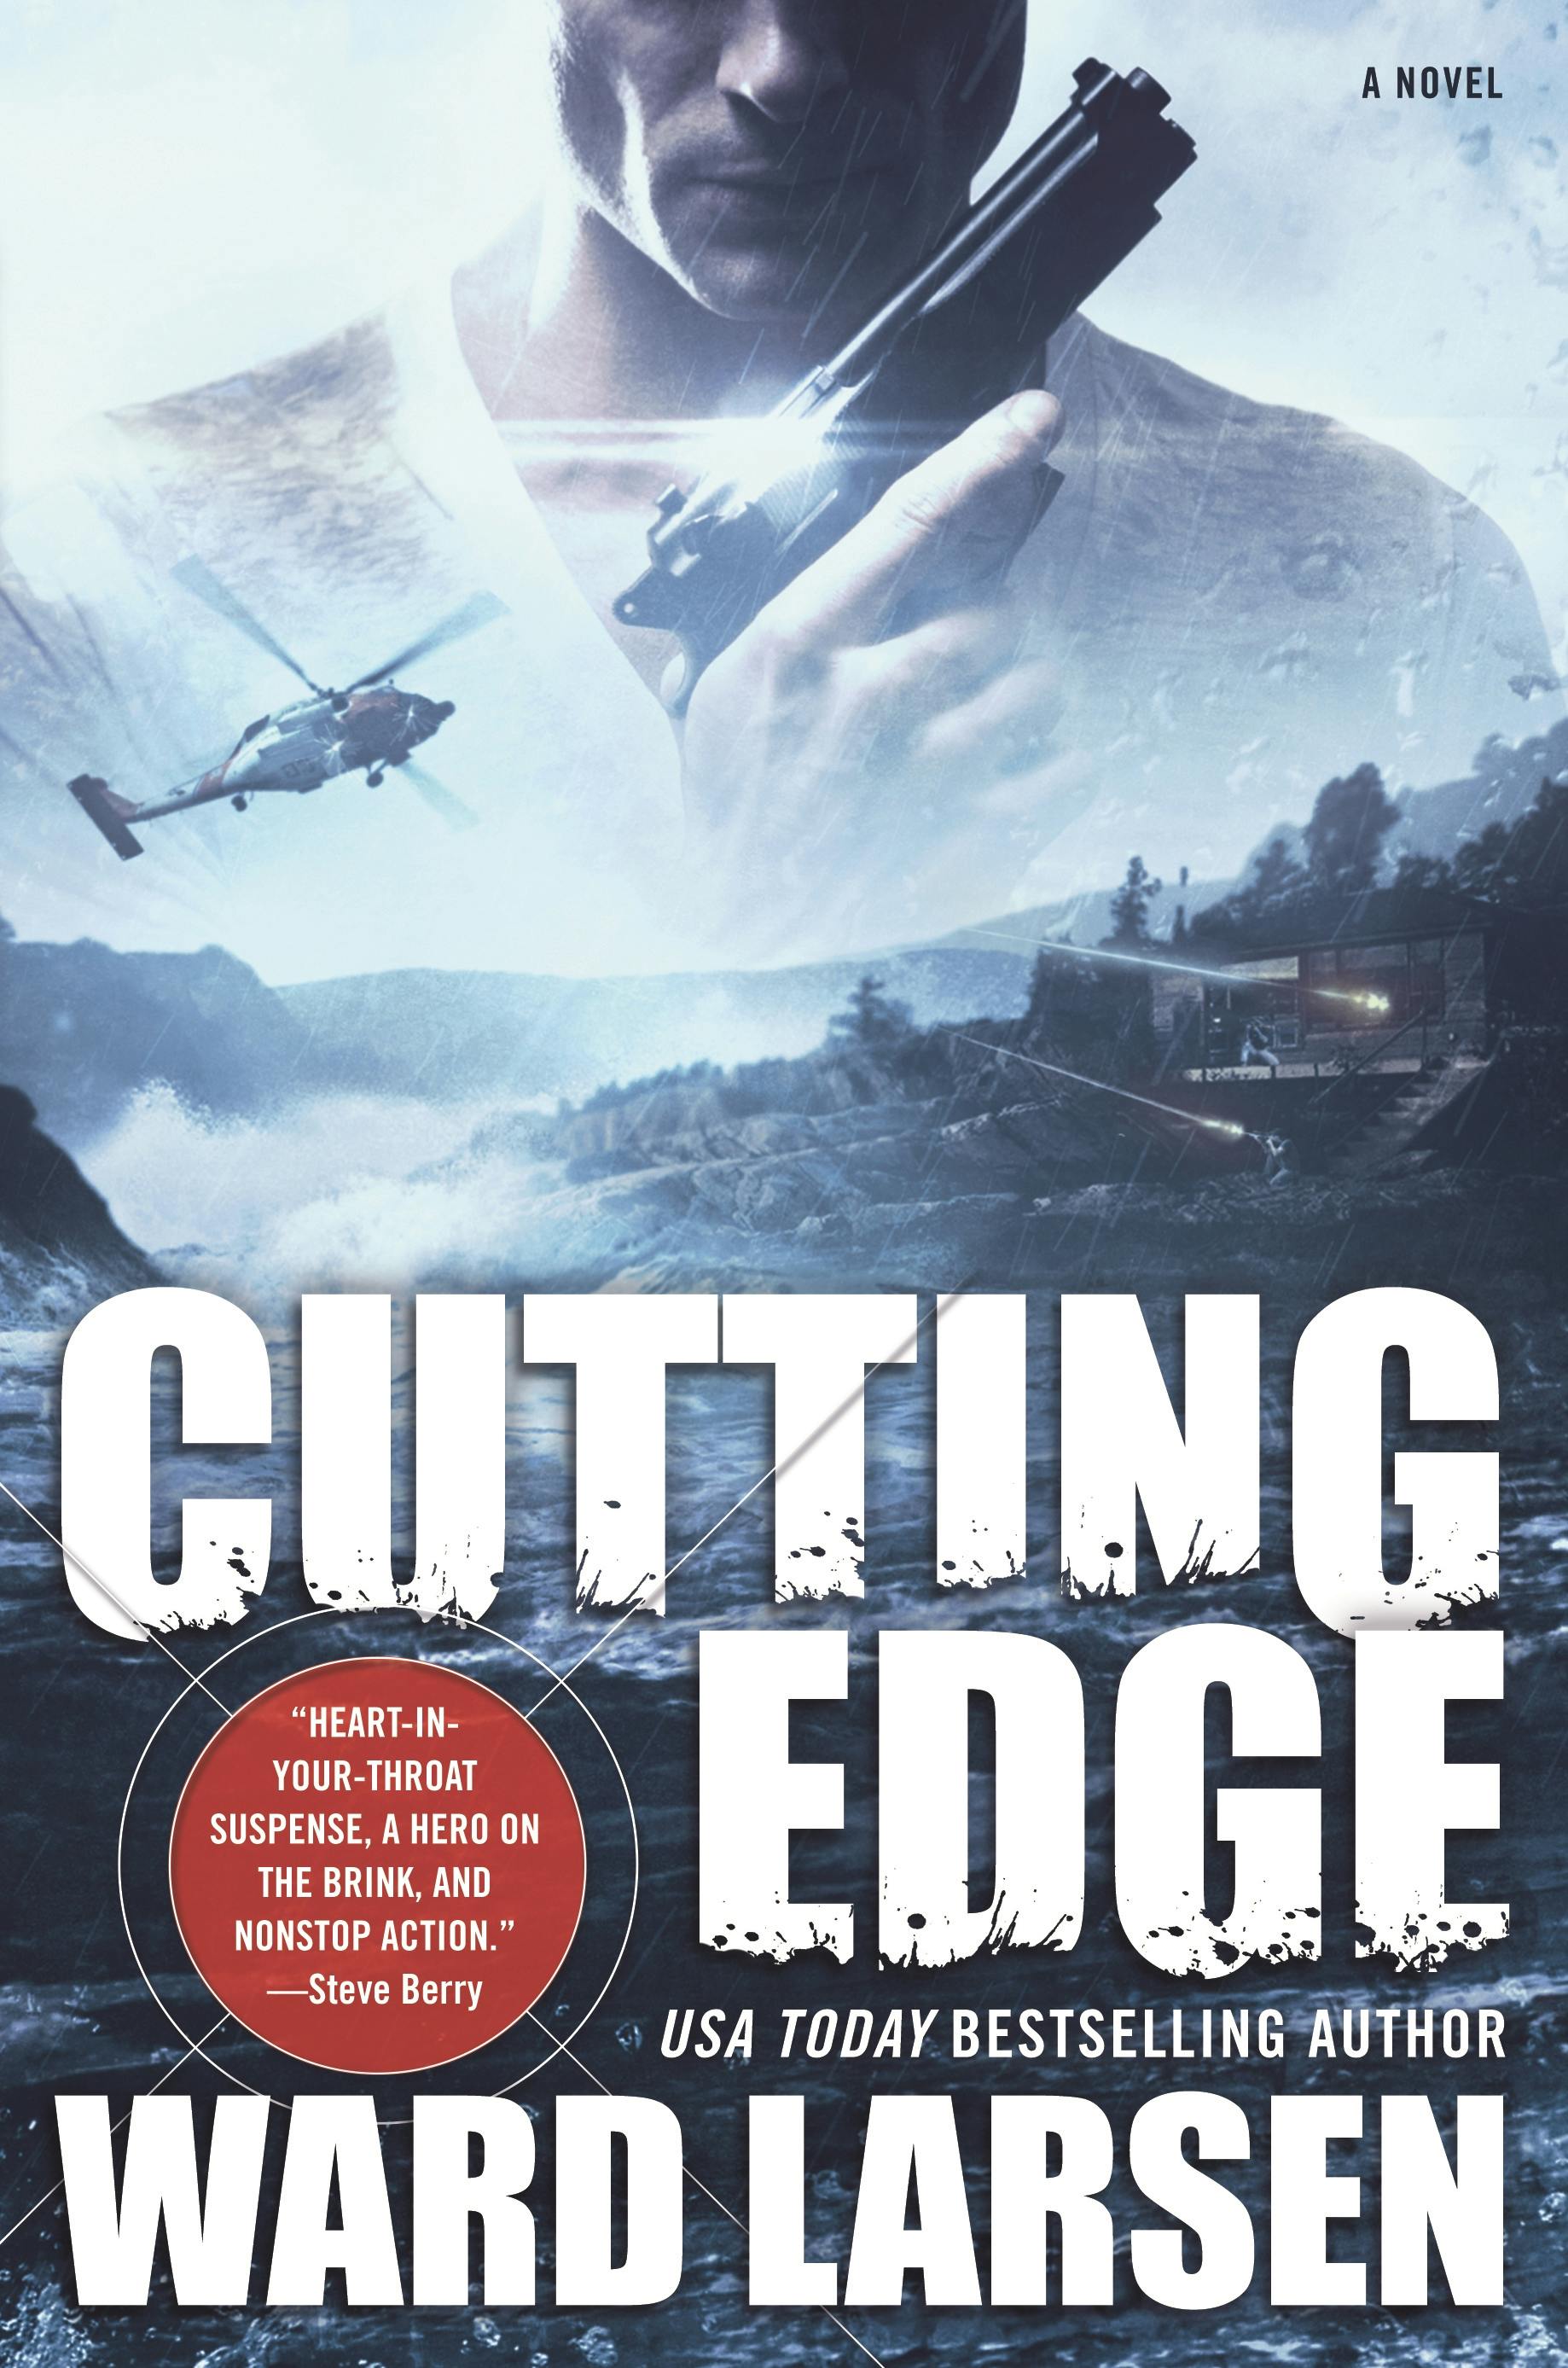 Cover for the book titled as: Cutting Edge